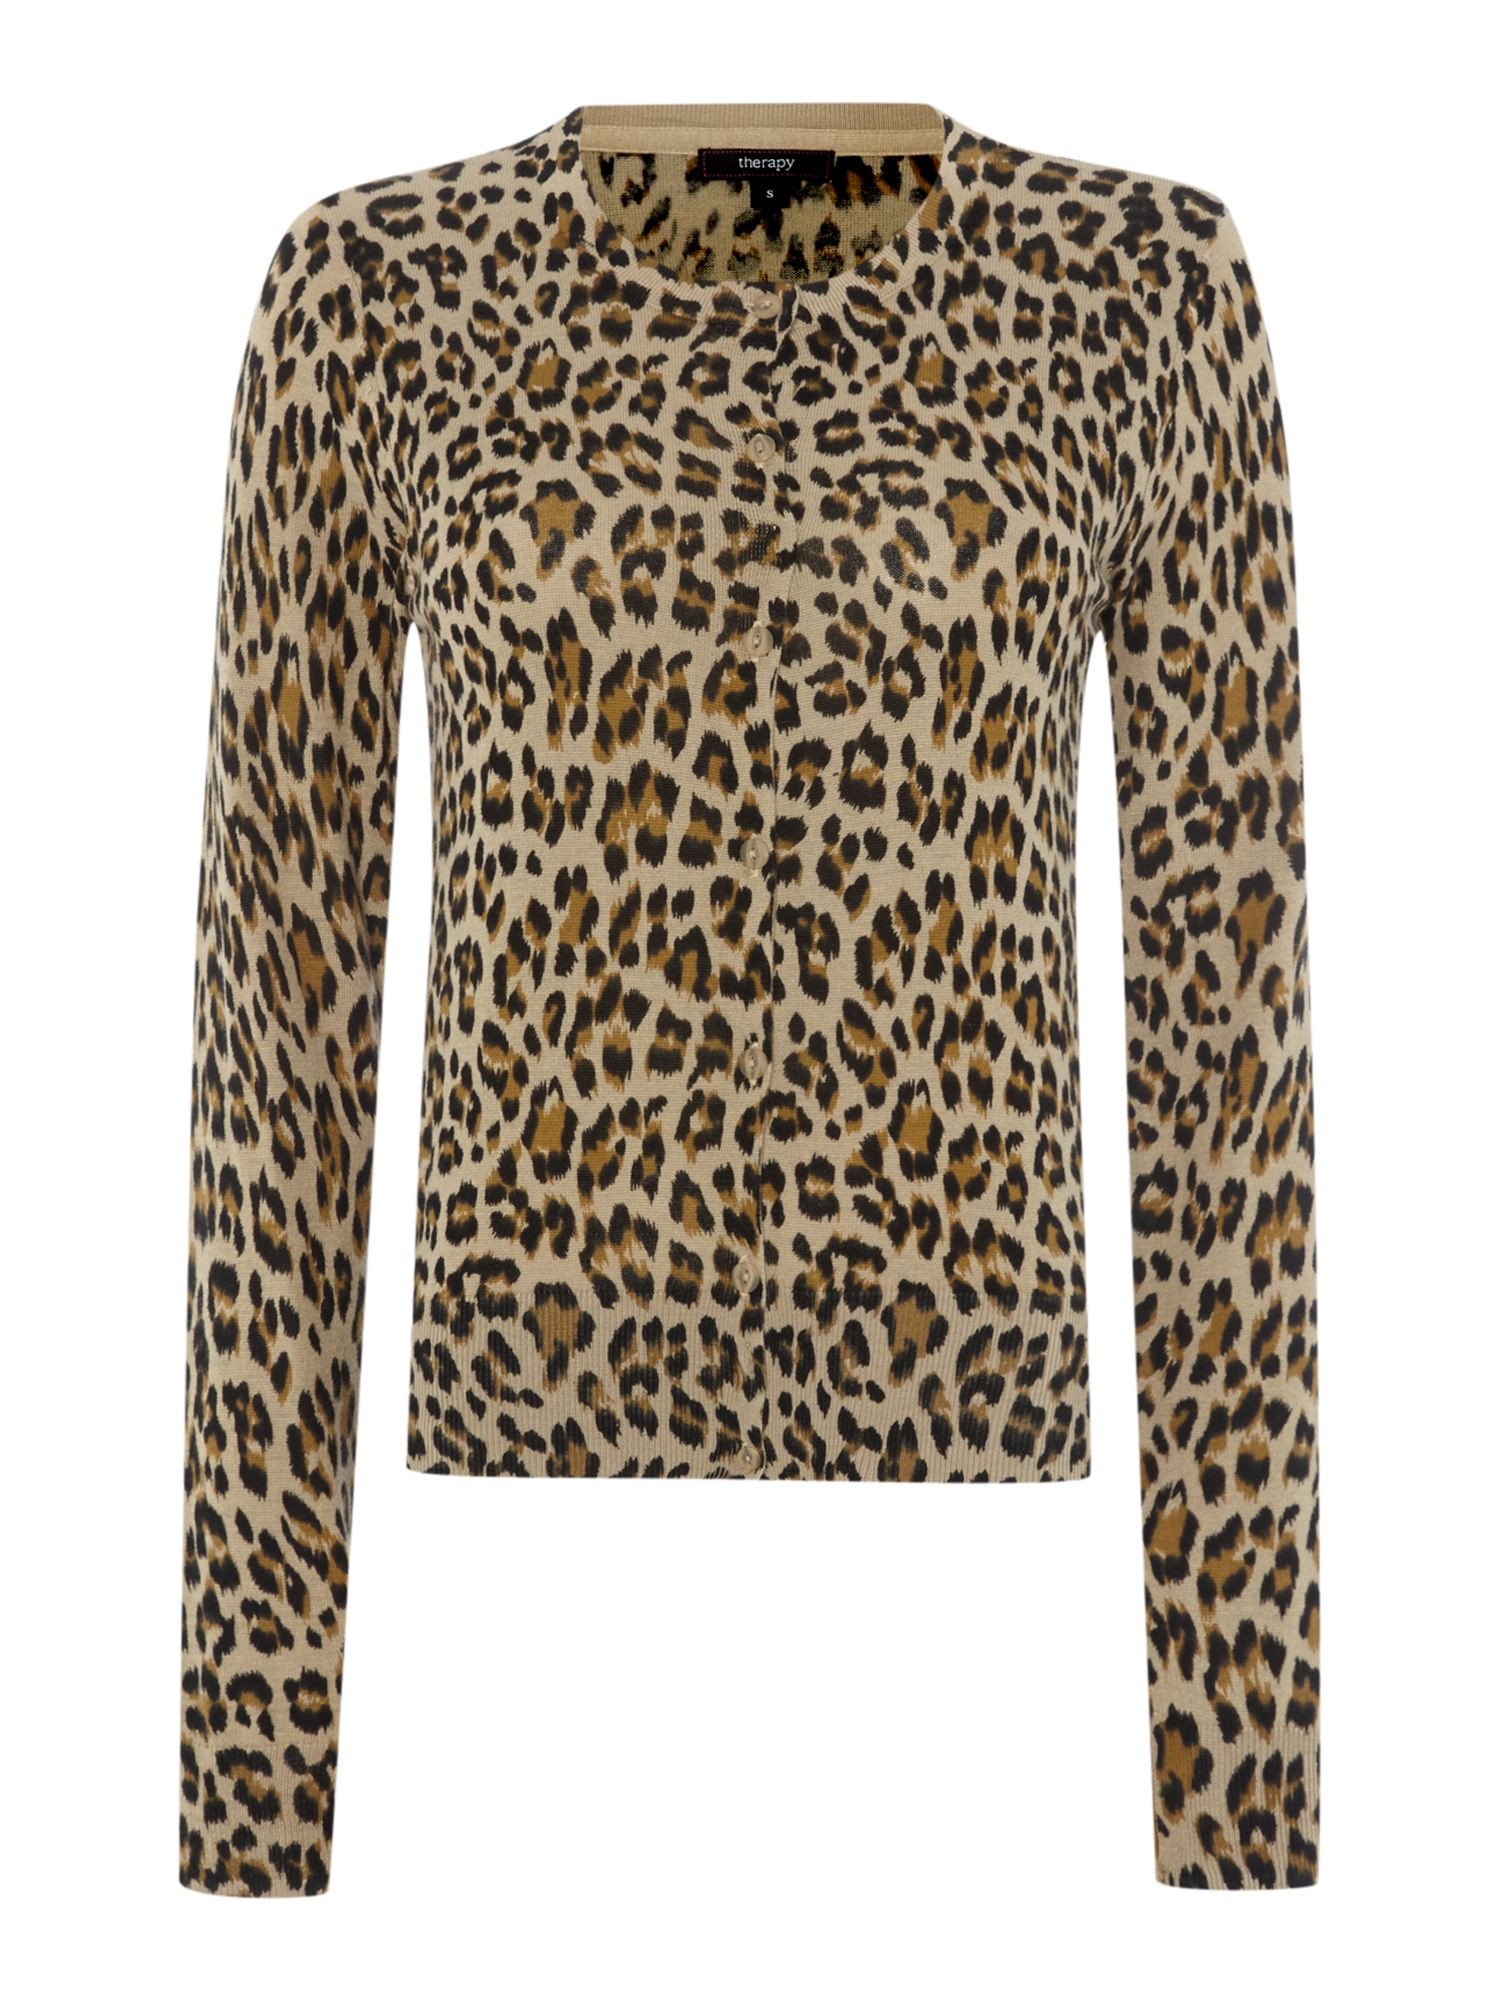 Therapy Leopard Print Crew Cardigan in Animal (Neutral) | Lyst